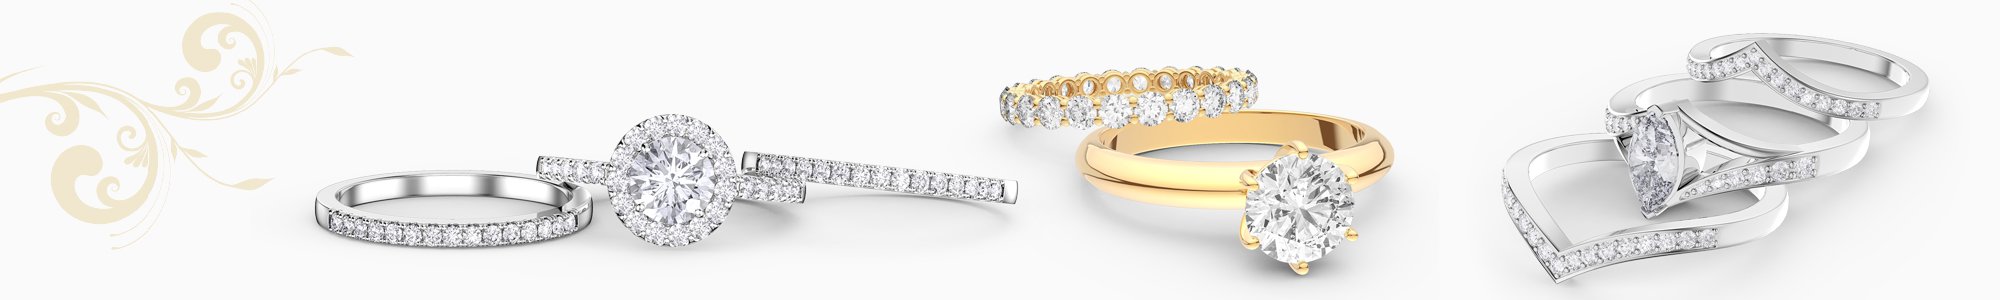 Shop for Bridal Ring Sets by Jian London Choose from our great selection direct from the Jian London Jewellery Store. Free UK Delivery.